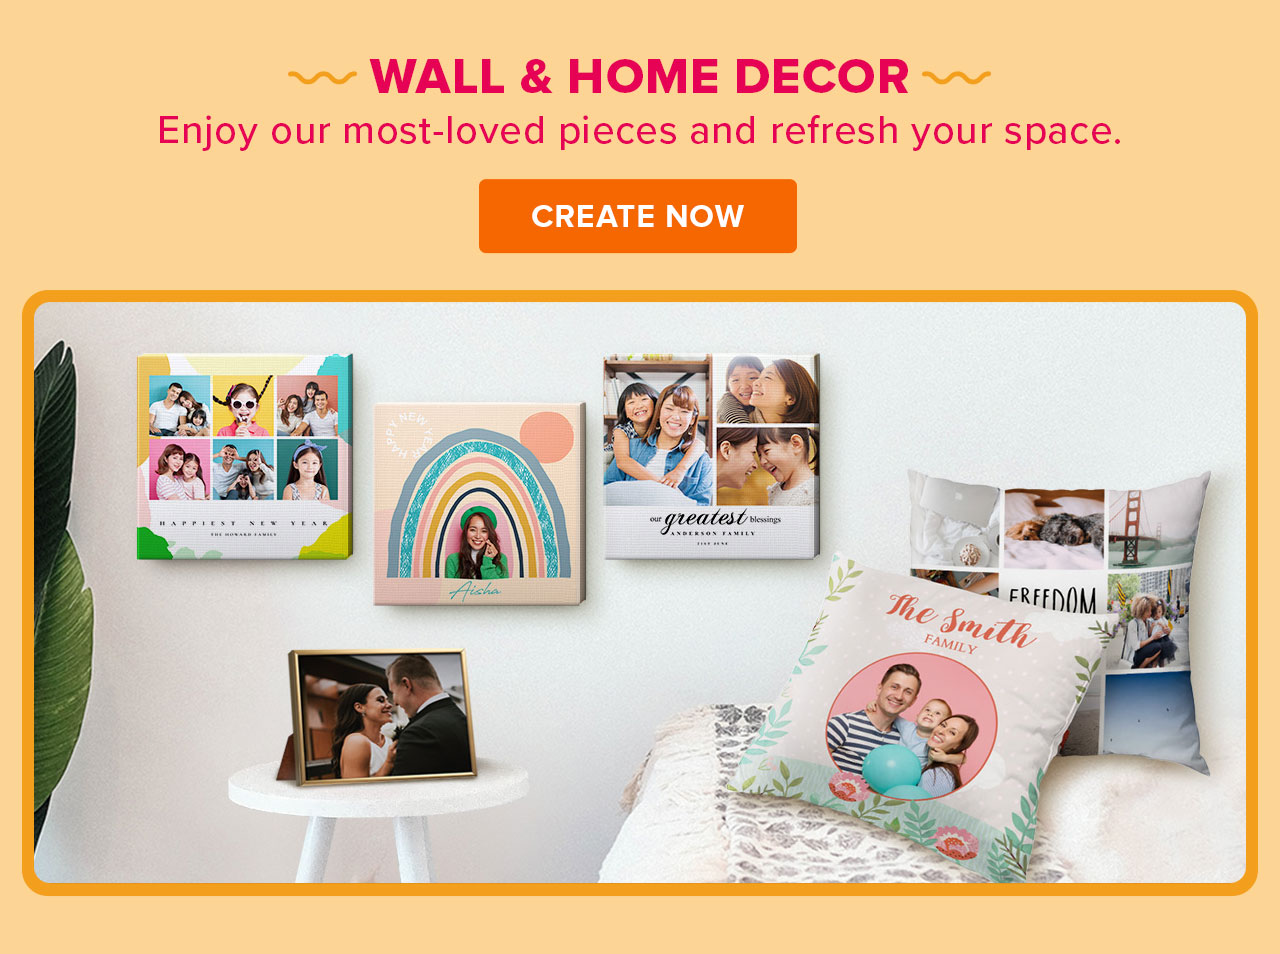  WALL HOME DECOR Enjoy our most-loved pieces and refresh your space. CREATE NOW - 7 ey B e U M Py 